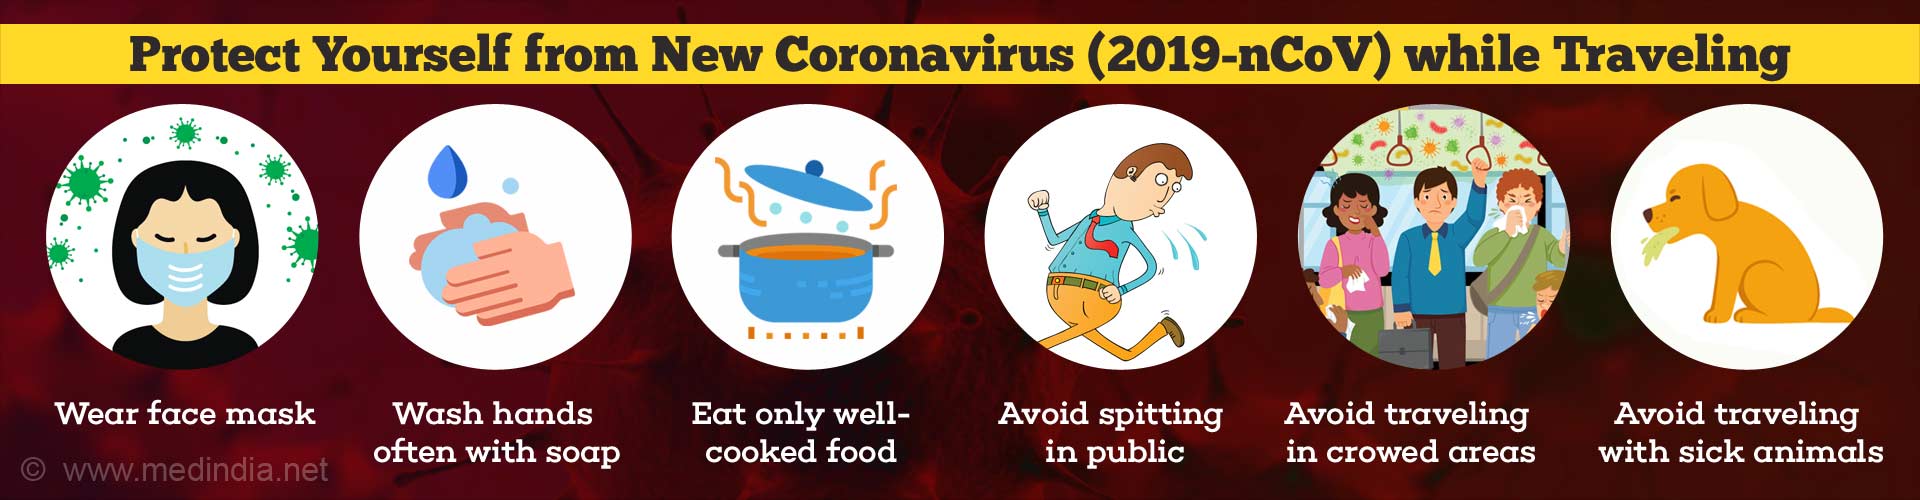 Protect yourself from new Coronavirus (2019-nCoV) while traveling. Wear face mask, wash hands often with soap, eat only well-cooked food, avoid spitting in public, avoid traveling in crowed areas, and avoid traveling with sick animals.